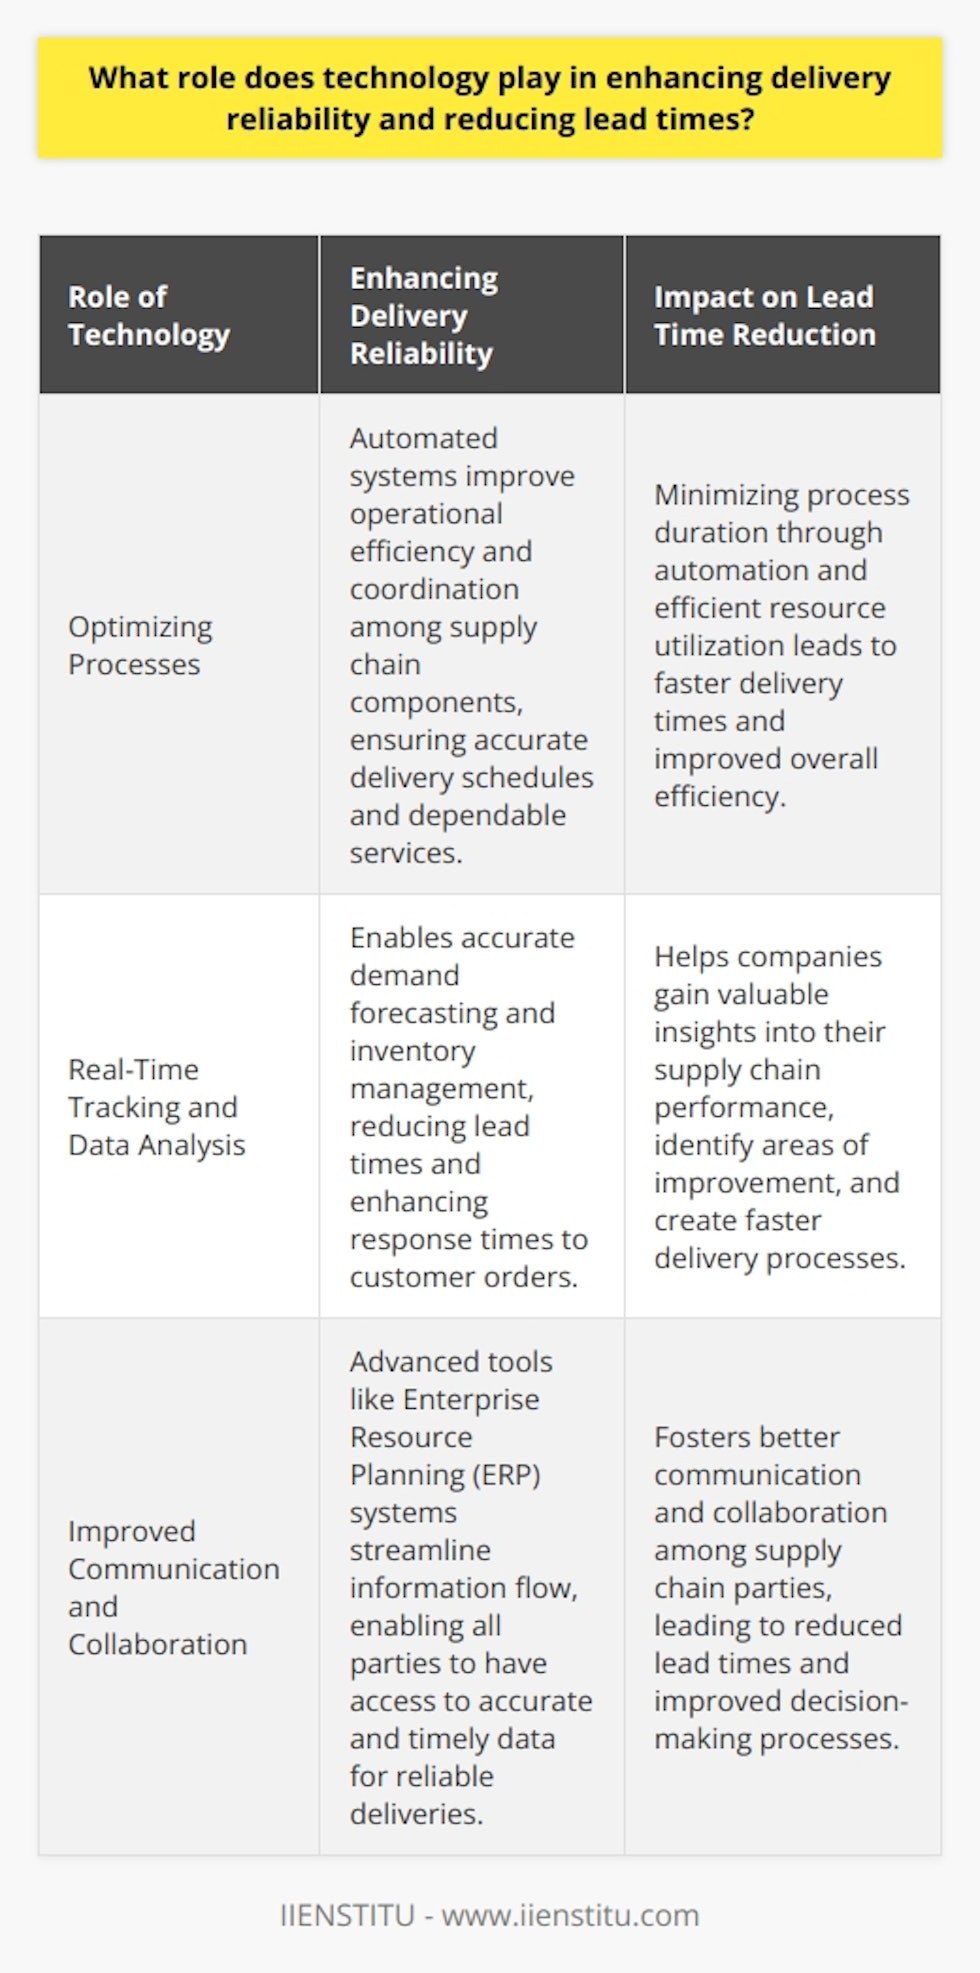 Role of Technology in Enhancing Delivery Reliability: Technology plays a vital role in enhancing delivery reliability by optimizing various processes and providing real-time data. With the help of automated systems, operational efficiency is improved, reducing the likelihood of human error and offering better coordination among different supply chain components. This ensures accurate delivery schedules and dependable services.Impact on Lead Time Reduction: Furthermore, technology has a significant impact on reducing lead times by minimizing process duration through automation and efficient resource utilization. Robotics and automation are capable of performing repetitive tasks faster and with greater precision, allowing managers to focus on strategic decision-making. This leads to faster delivery times and improved overall efficiency.Real-Time Tracking and Data Analysis: The implementation of technology also enables real-time tracking and data analysis, which helps companies accurately forecast demand and manage inventory levels. As a result, lead times are reduced, and response times to customer orders are quicker. By utilizing Internet of Things (IoT) devices and advanced software, companies can gain valuable insights into their supply chain performance and identify areas where technology can create improvements.Improved Communication and Collaboration: Additionally, technology fosters better communication and collaboration among the parties involved in the supply chain. Advanced tools like Enterprise Resource Planning (ERP) systems streamline the flow of information, ensuring that all parties have access to accurate and timely data. This improves the decision-making process, resulting in more reliable deliveries and reduced lead times.Conclusion: In conclusion, technology plays a crucial role in enhancing delivery reliability and reducing lead times by streamlining communication, facilitating real-time tracking and data analysis, and optimizing process efficiency. Businesses that adopt technology in their supply chain operations can benefit from increased customer satisfaction and improved overall organizational performance. By utilizing technology effectively, companies can stay ahead in a competitive marketplace and ensure dependable and efficient delivery services.